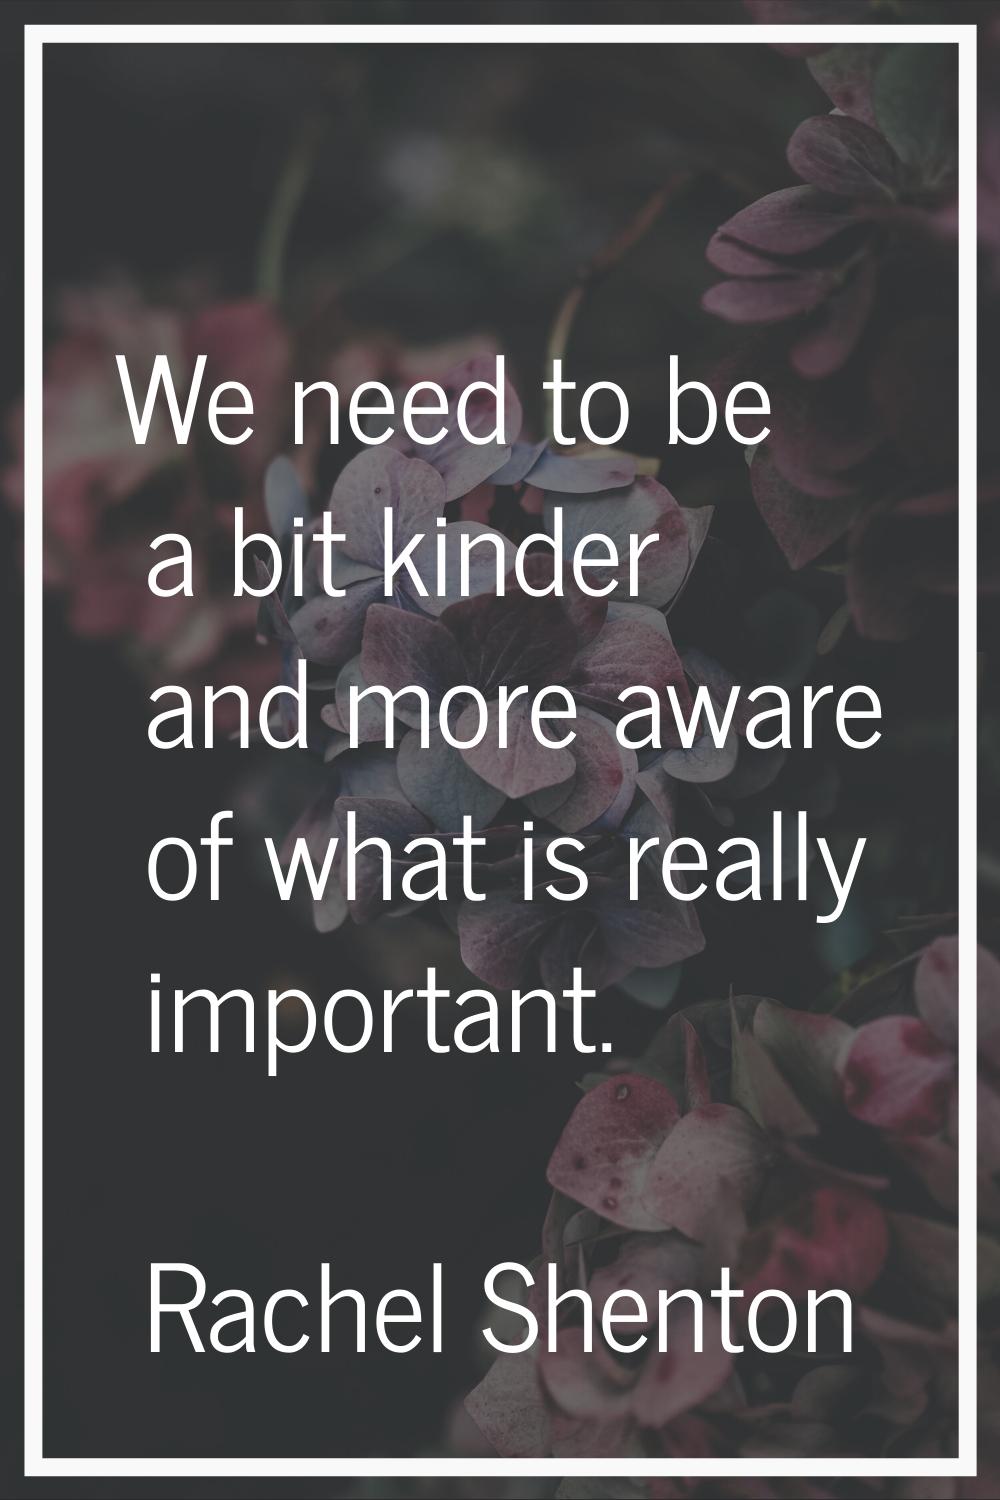 We need to be a bit kinder and more aware of what is really important.